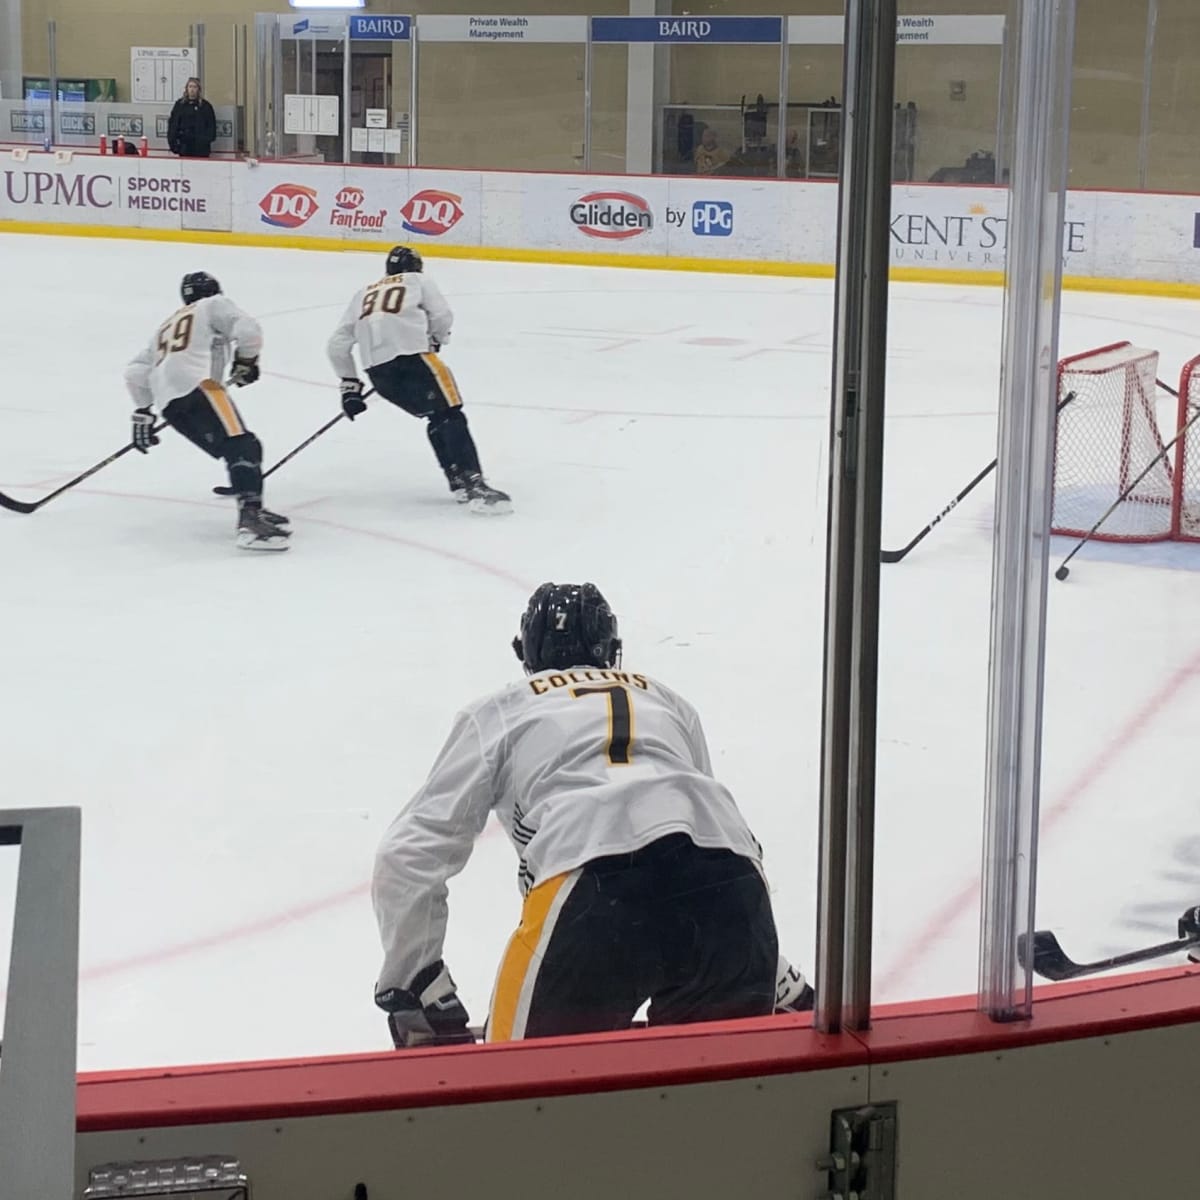 Penguins Unofficial Skate & Scrimmage; New Players Show Well, But